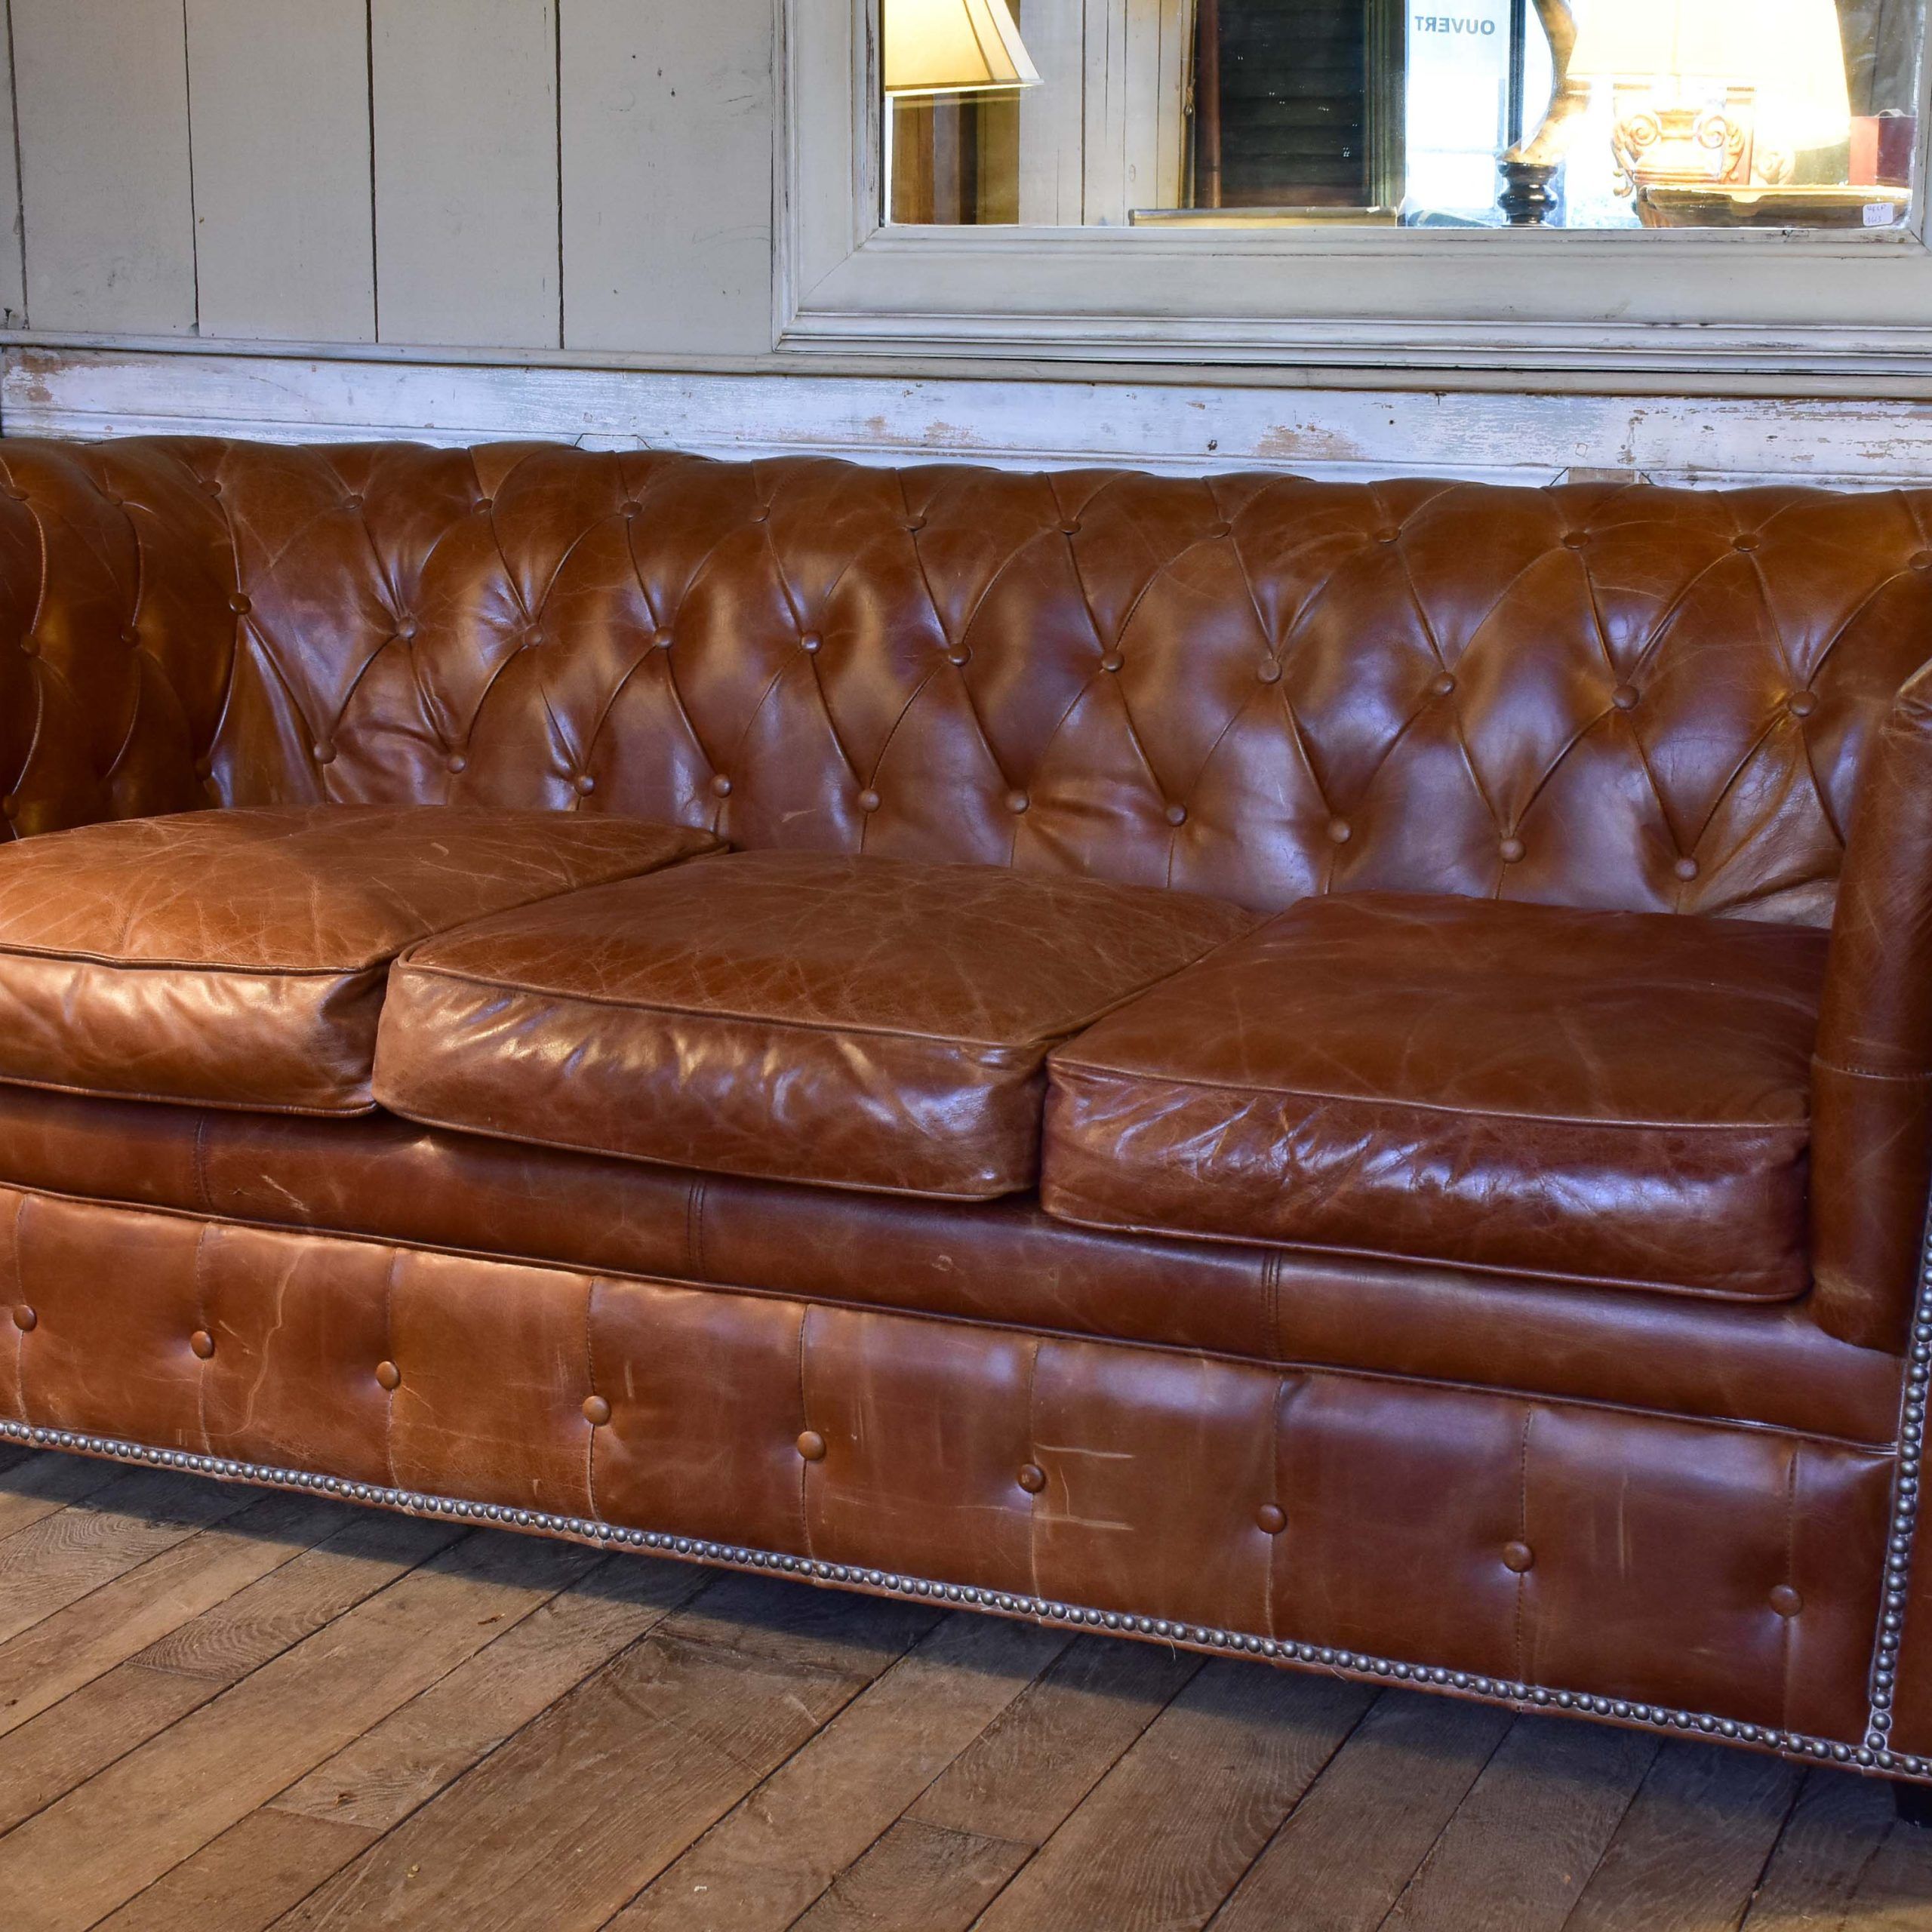 Leather Chesterfield Three Seat Sofa From The 1940’s – Chez Pluie With Regard To Chesterfield Sofas (View 18 of 21)